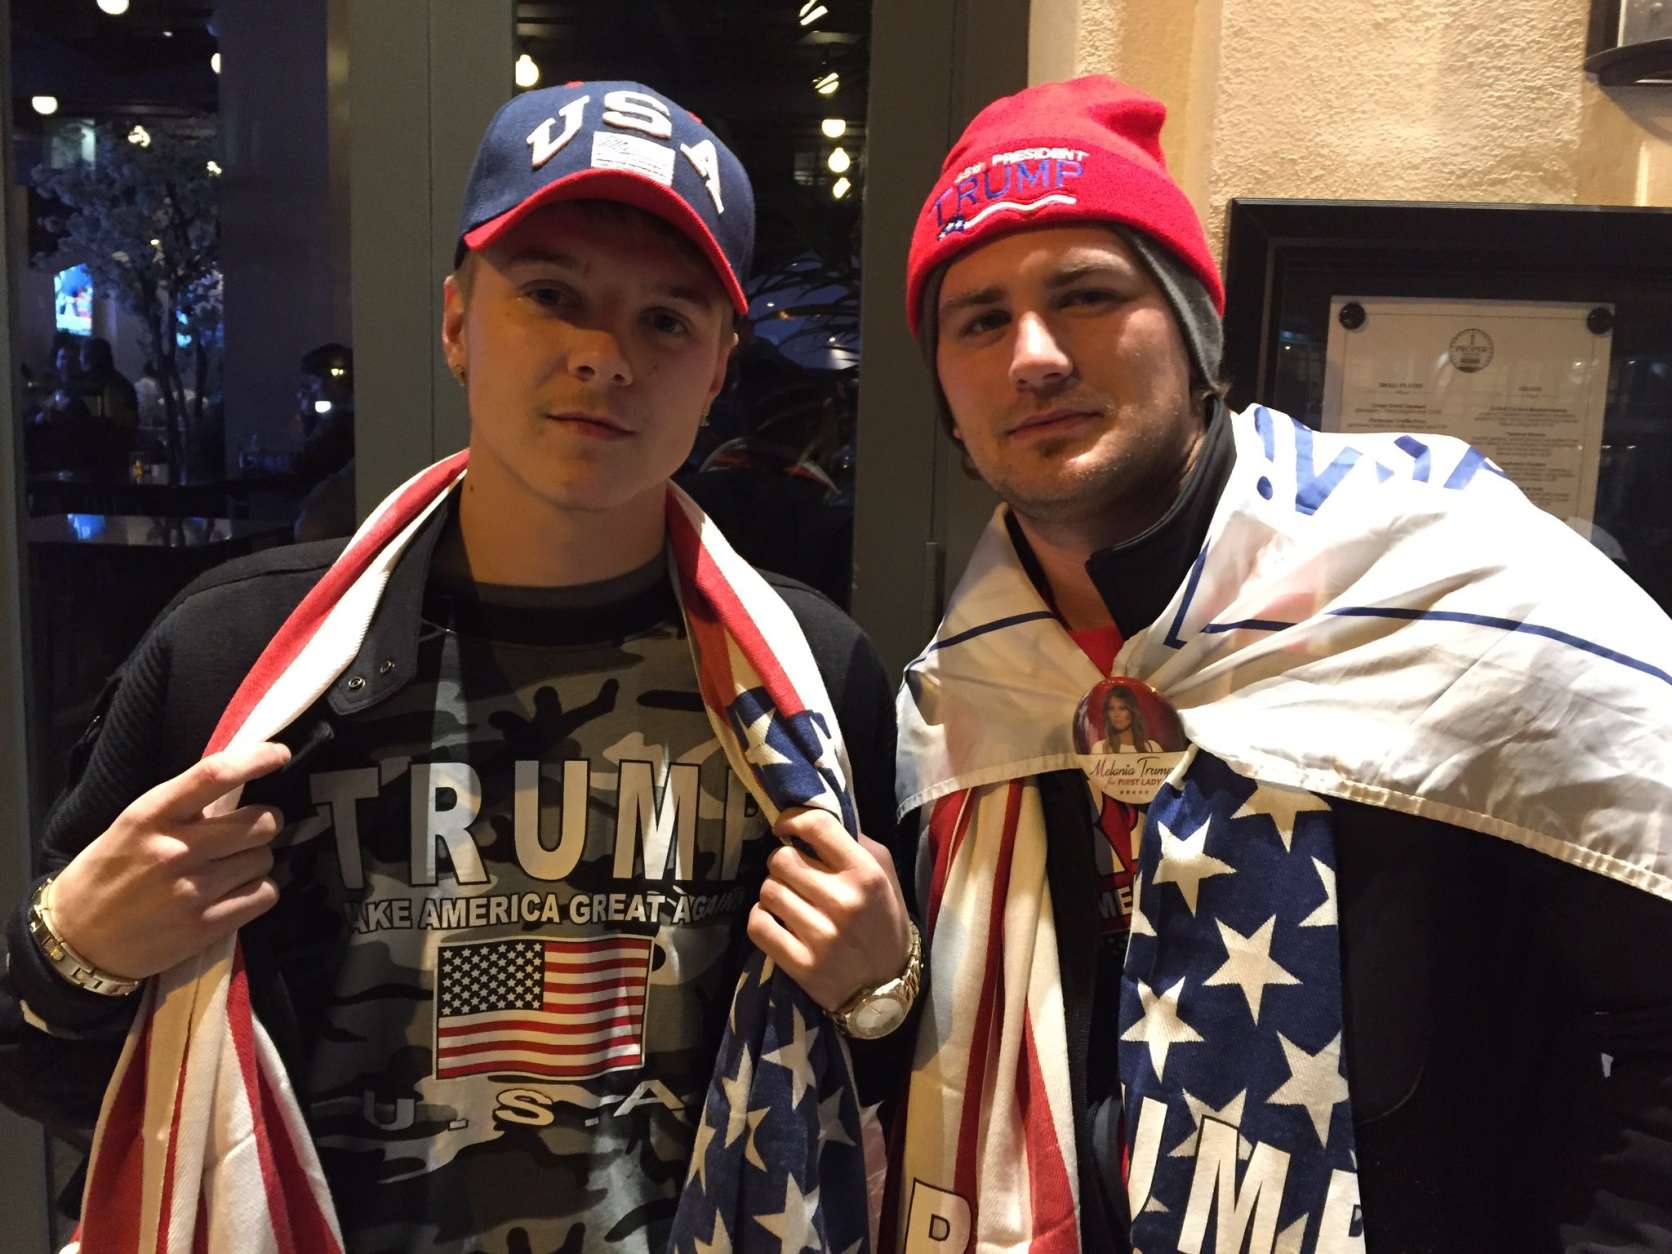 Trump supporters were also on hand outside the National Press Club Thursday night. (WTOP/Michelle Basch)